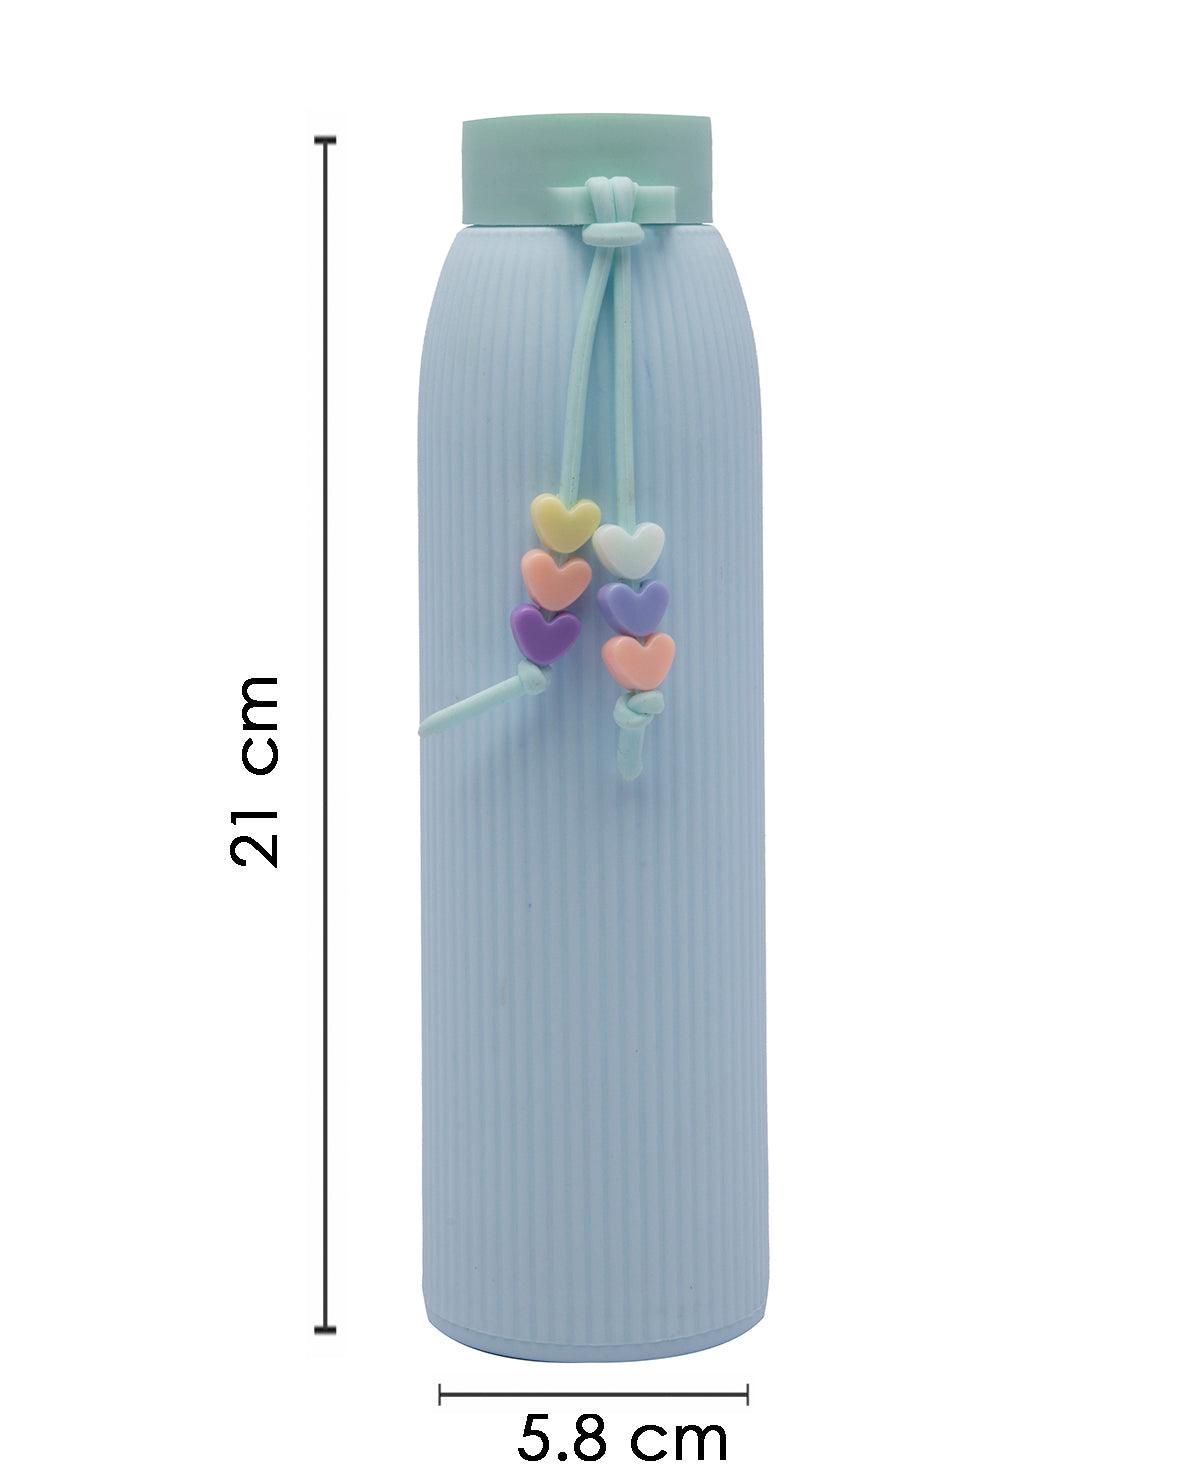 Water Bottle, for Home, Office, School, or Gym, Blue, Plastic & Glass, 310 mL - MARKET 99